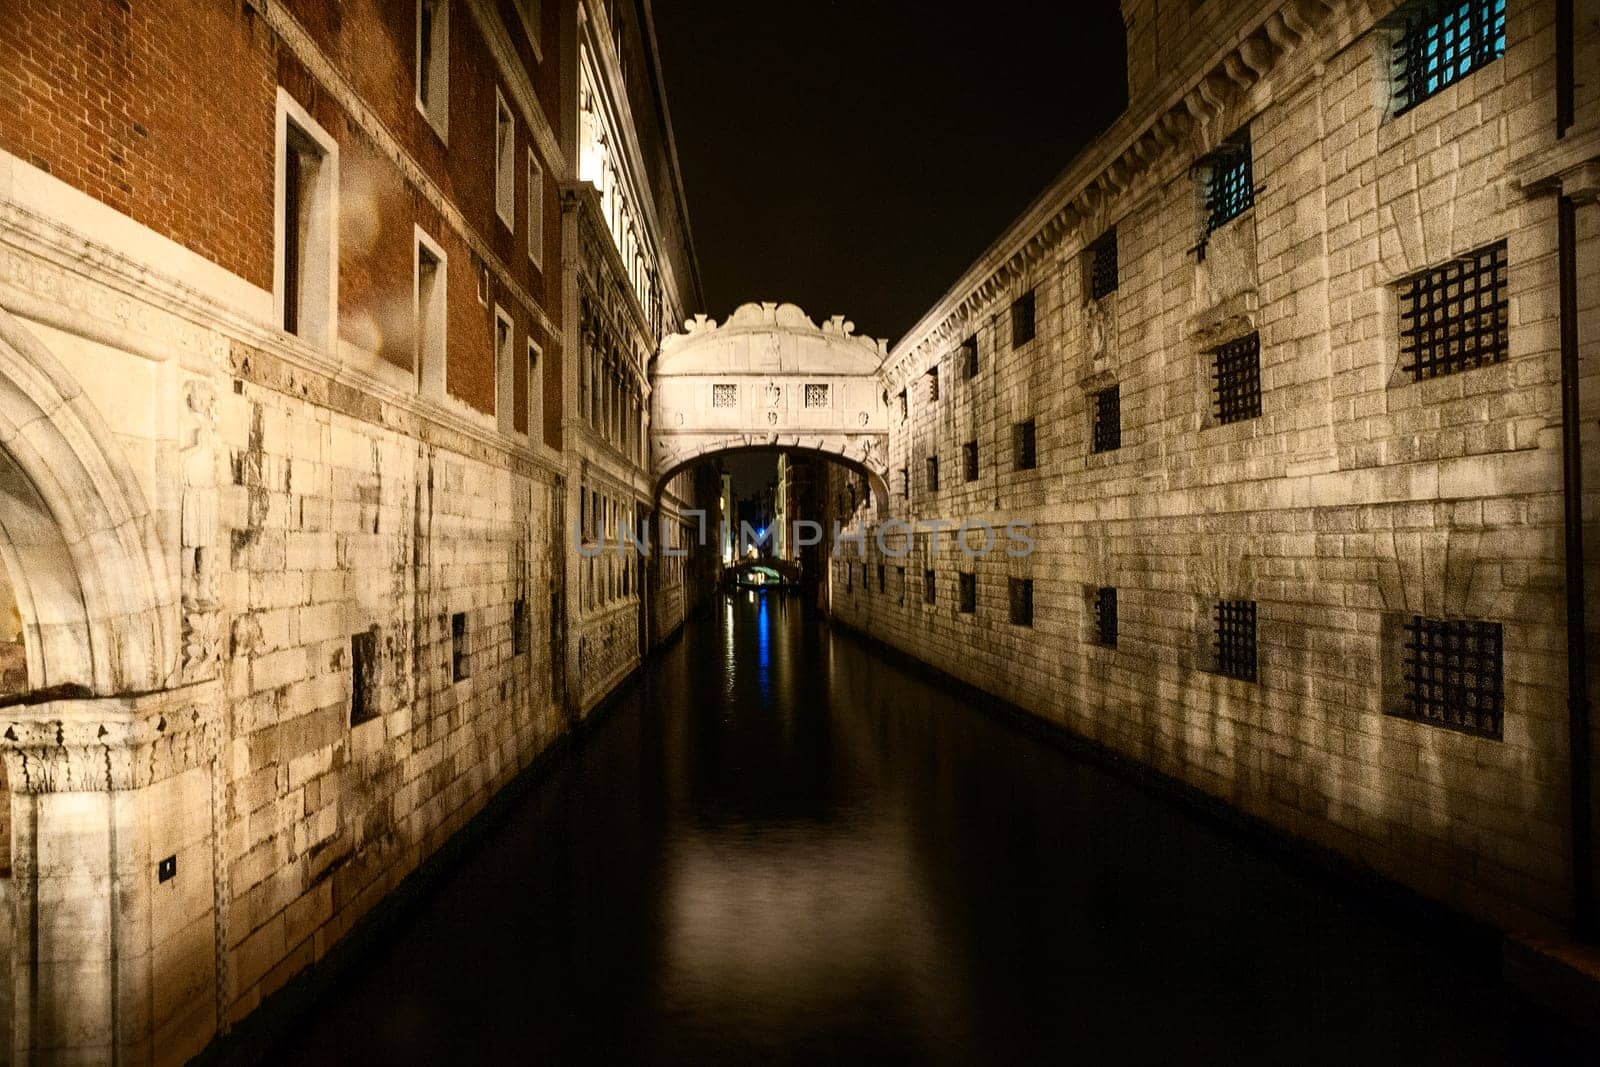 The famous bridge of sighs of Venice shot at night